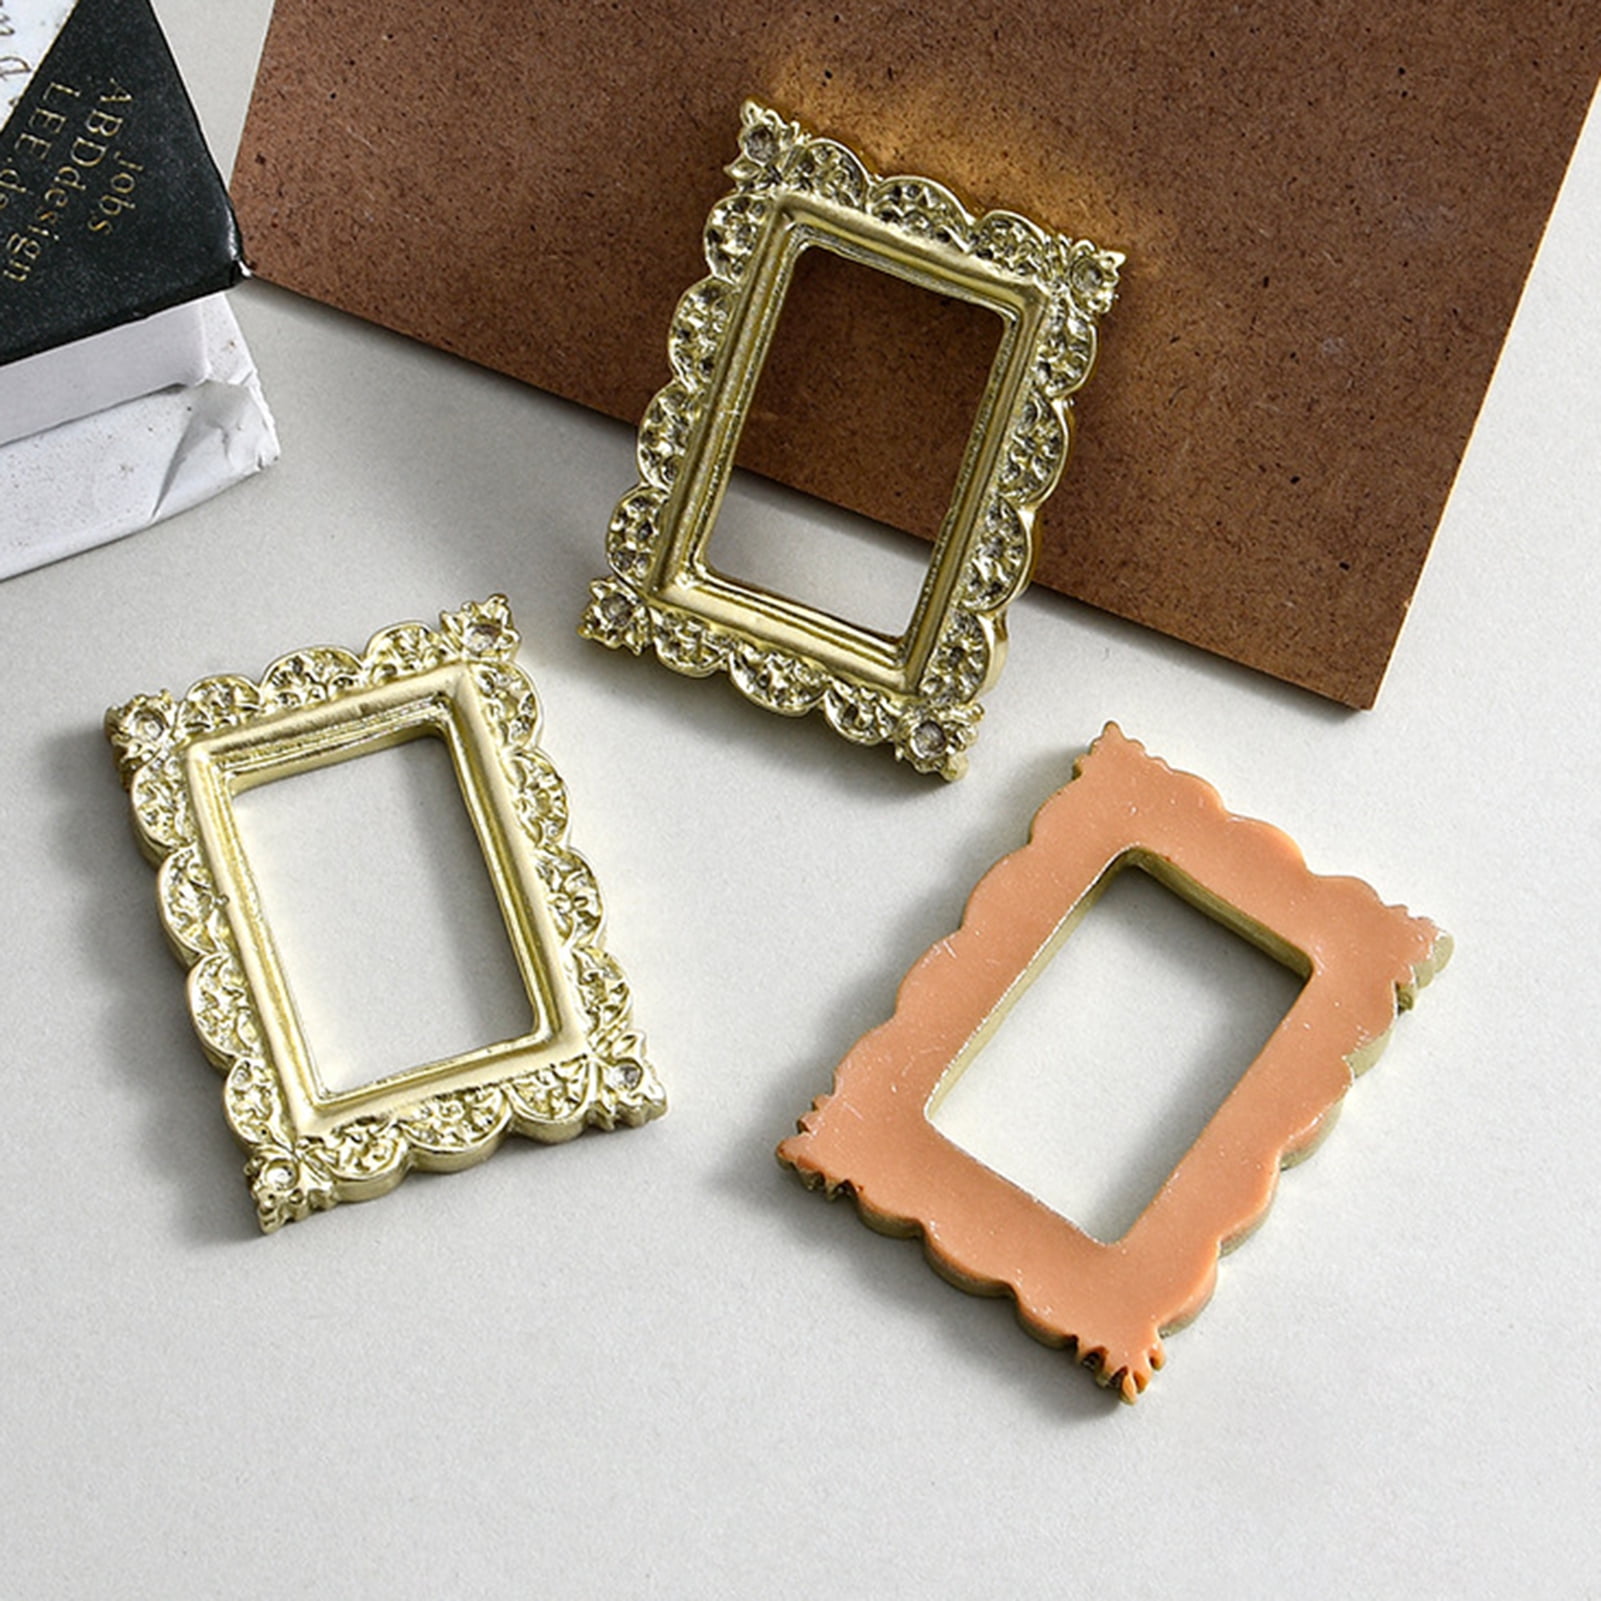 Tiny Picture Frames 